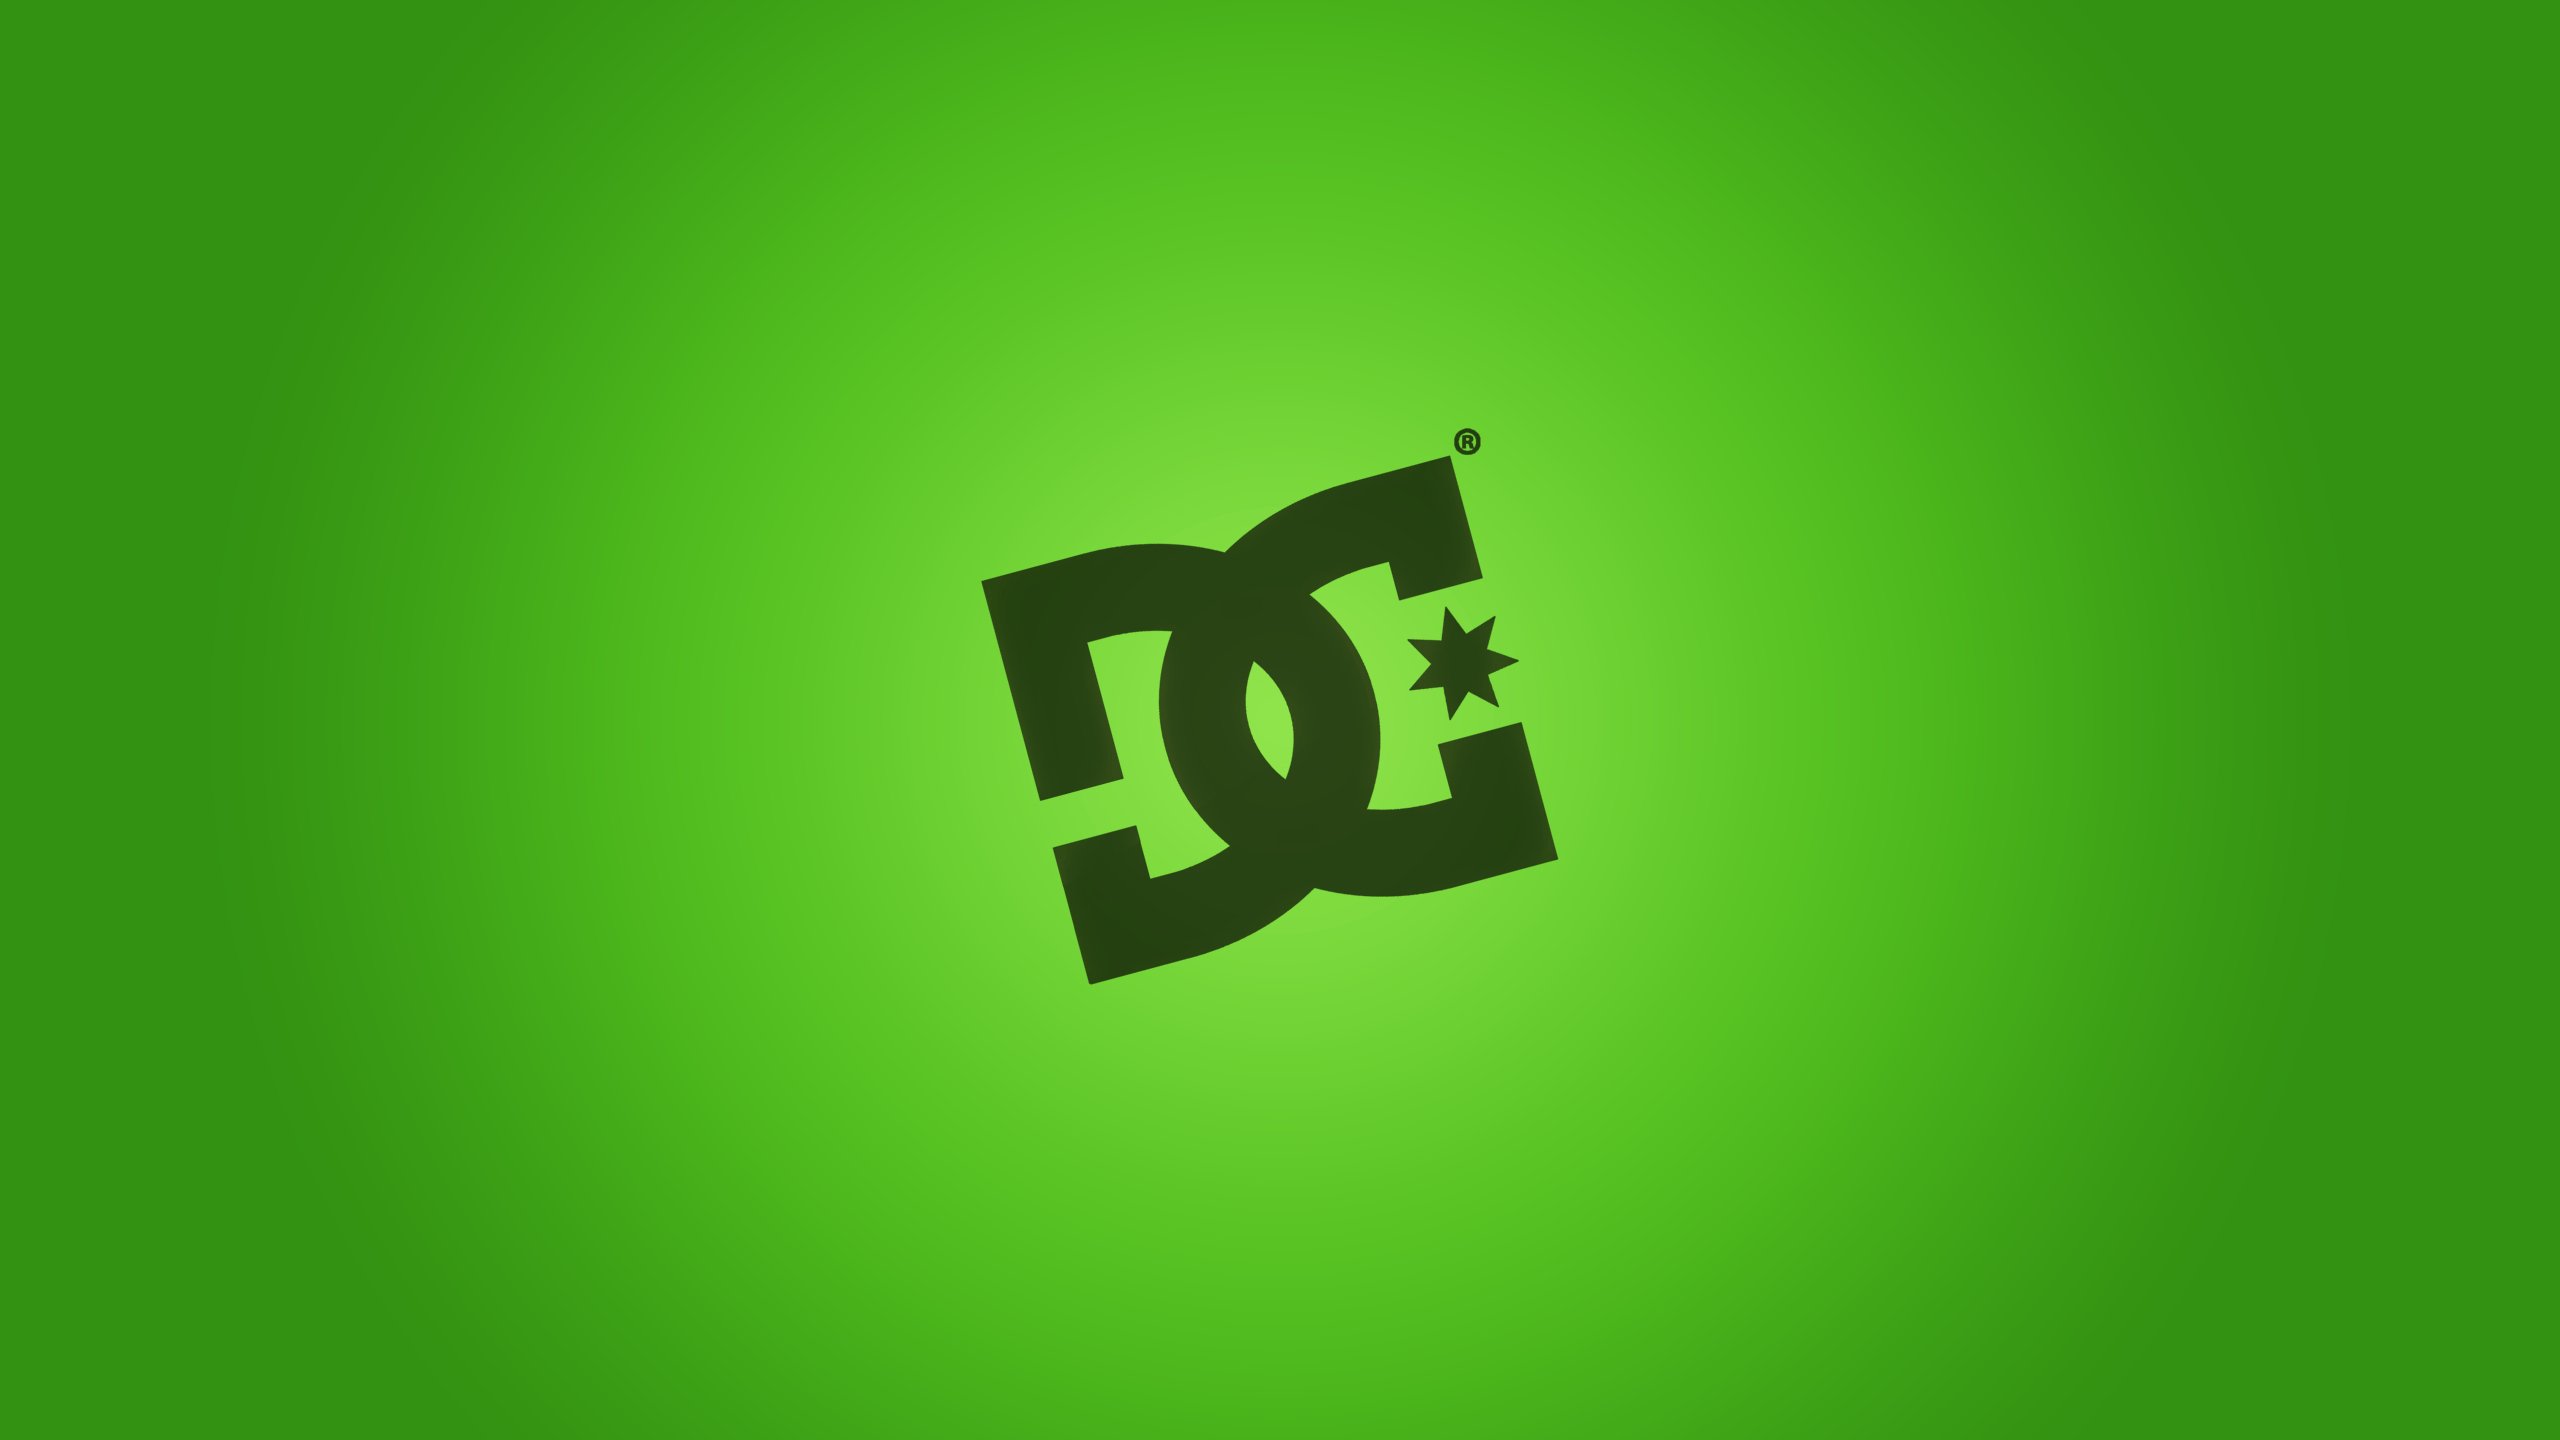 Green Background And Wallpaper DC Shoes Logo. Skateboard brand